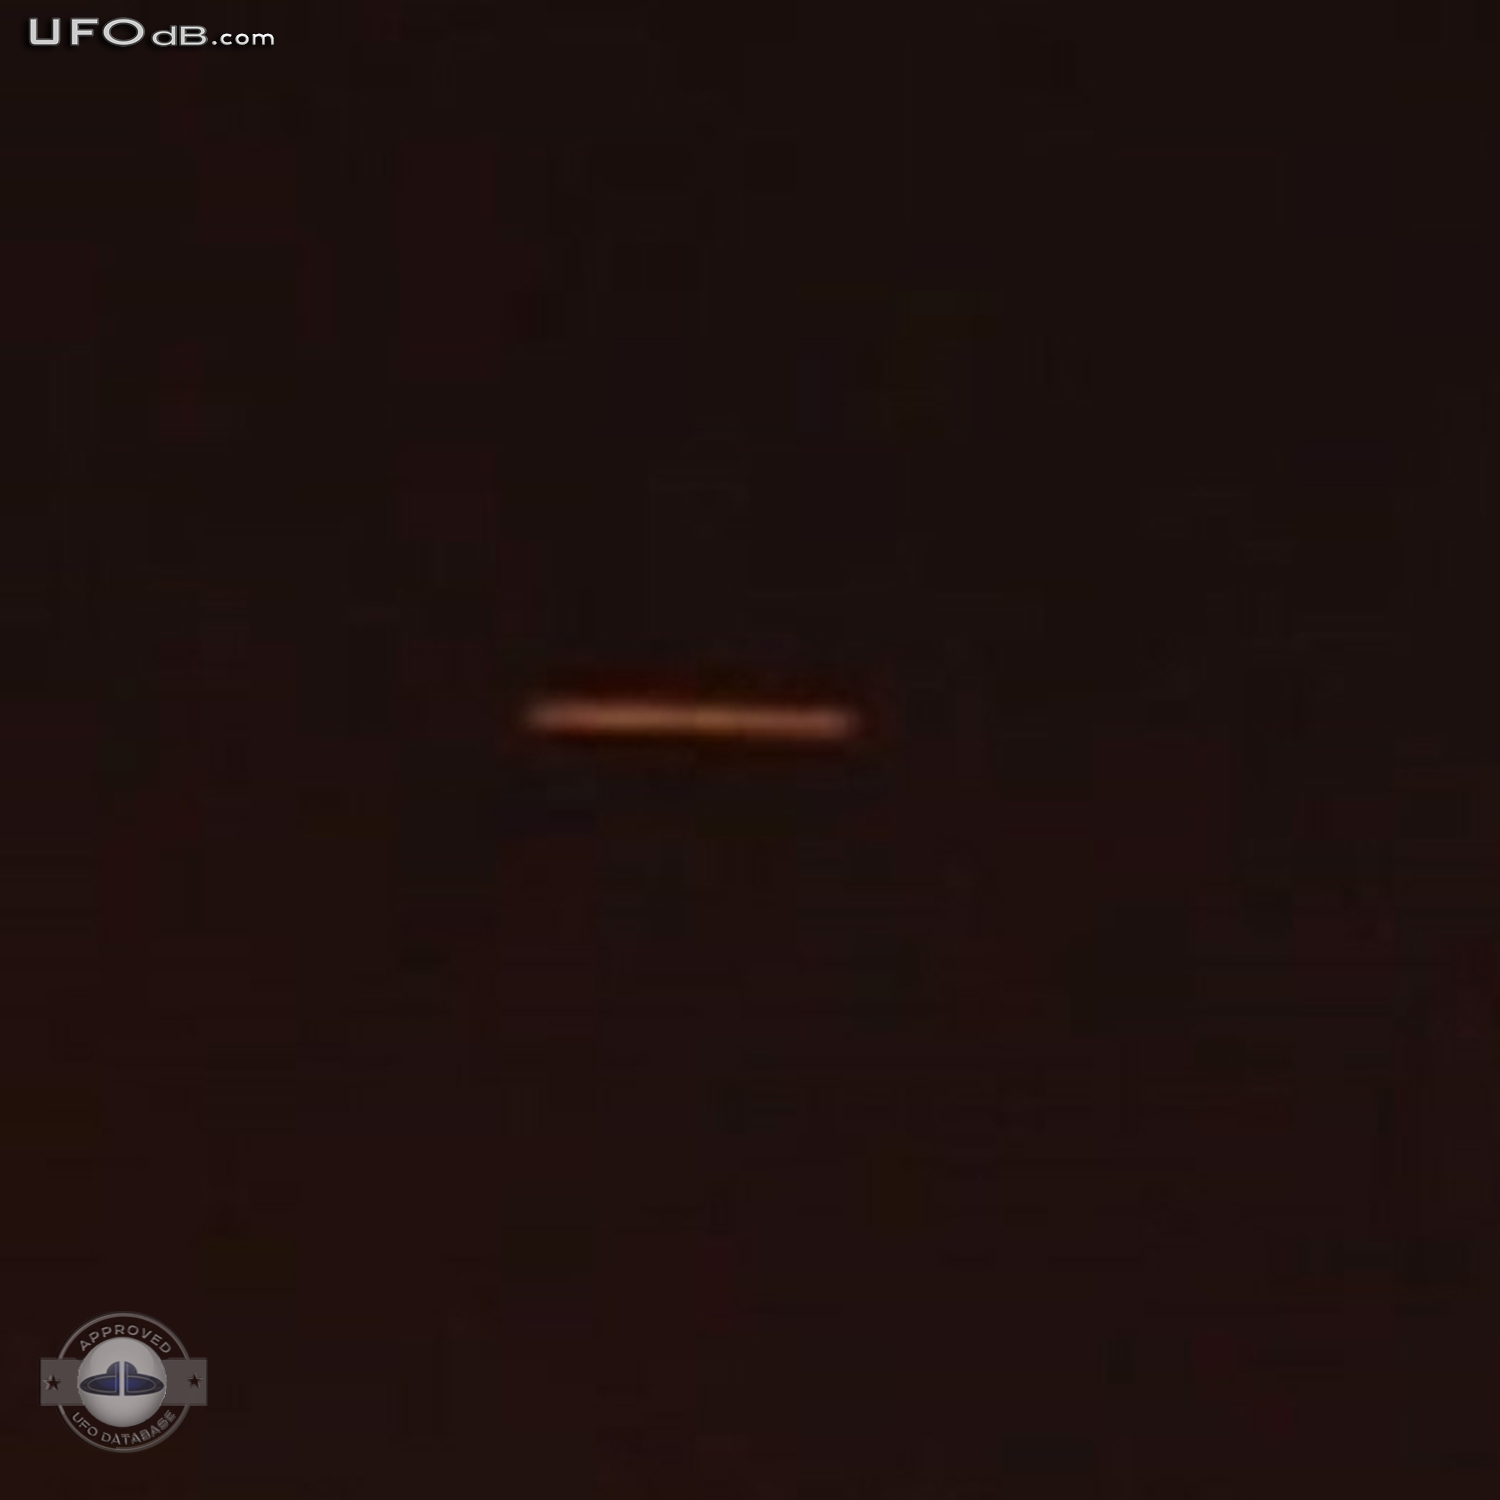 Washington No Fly Zone visited by a UFO | D.C. USA | February 14 2011 UFO Picture #258-3